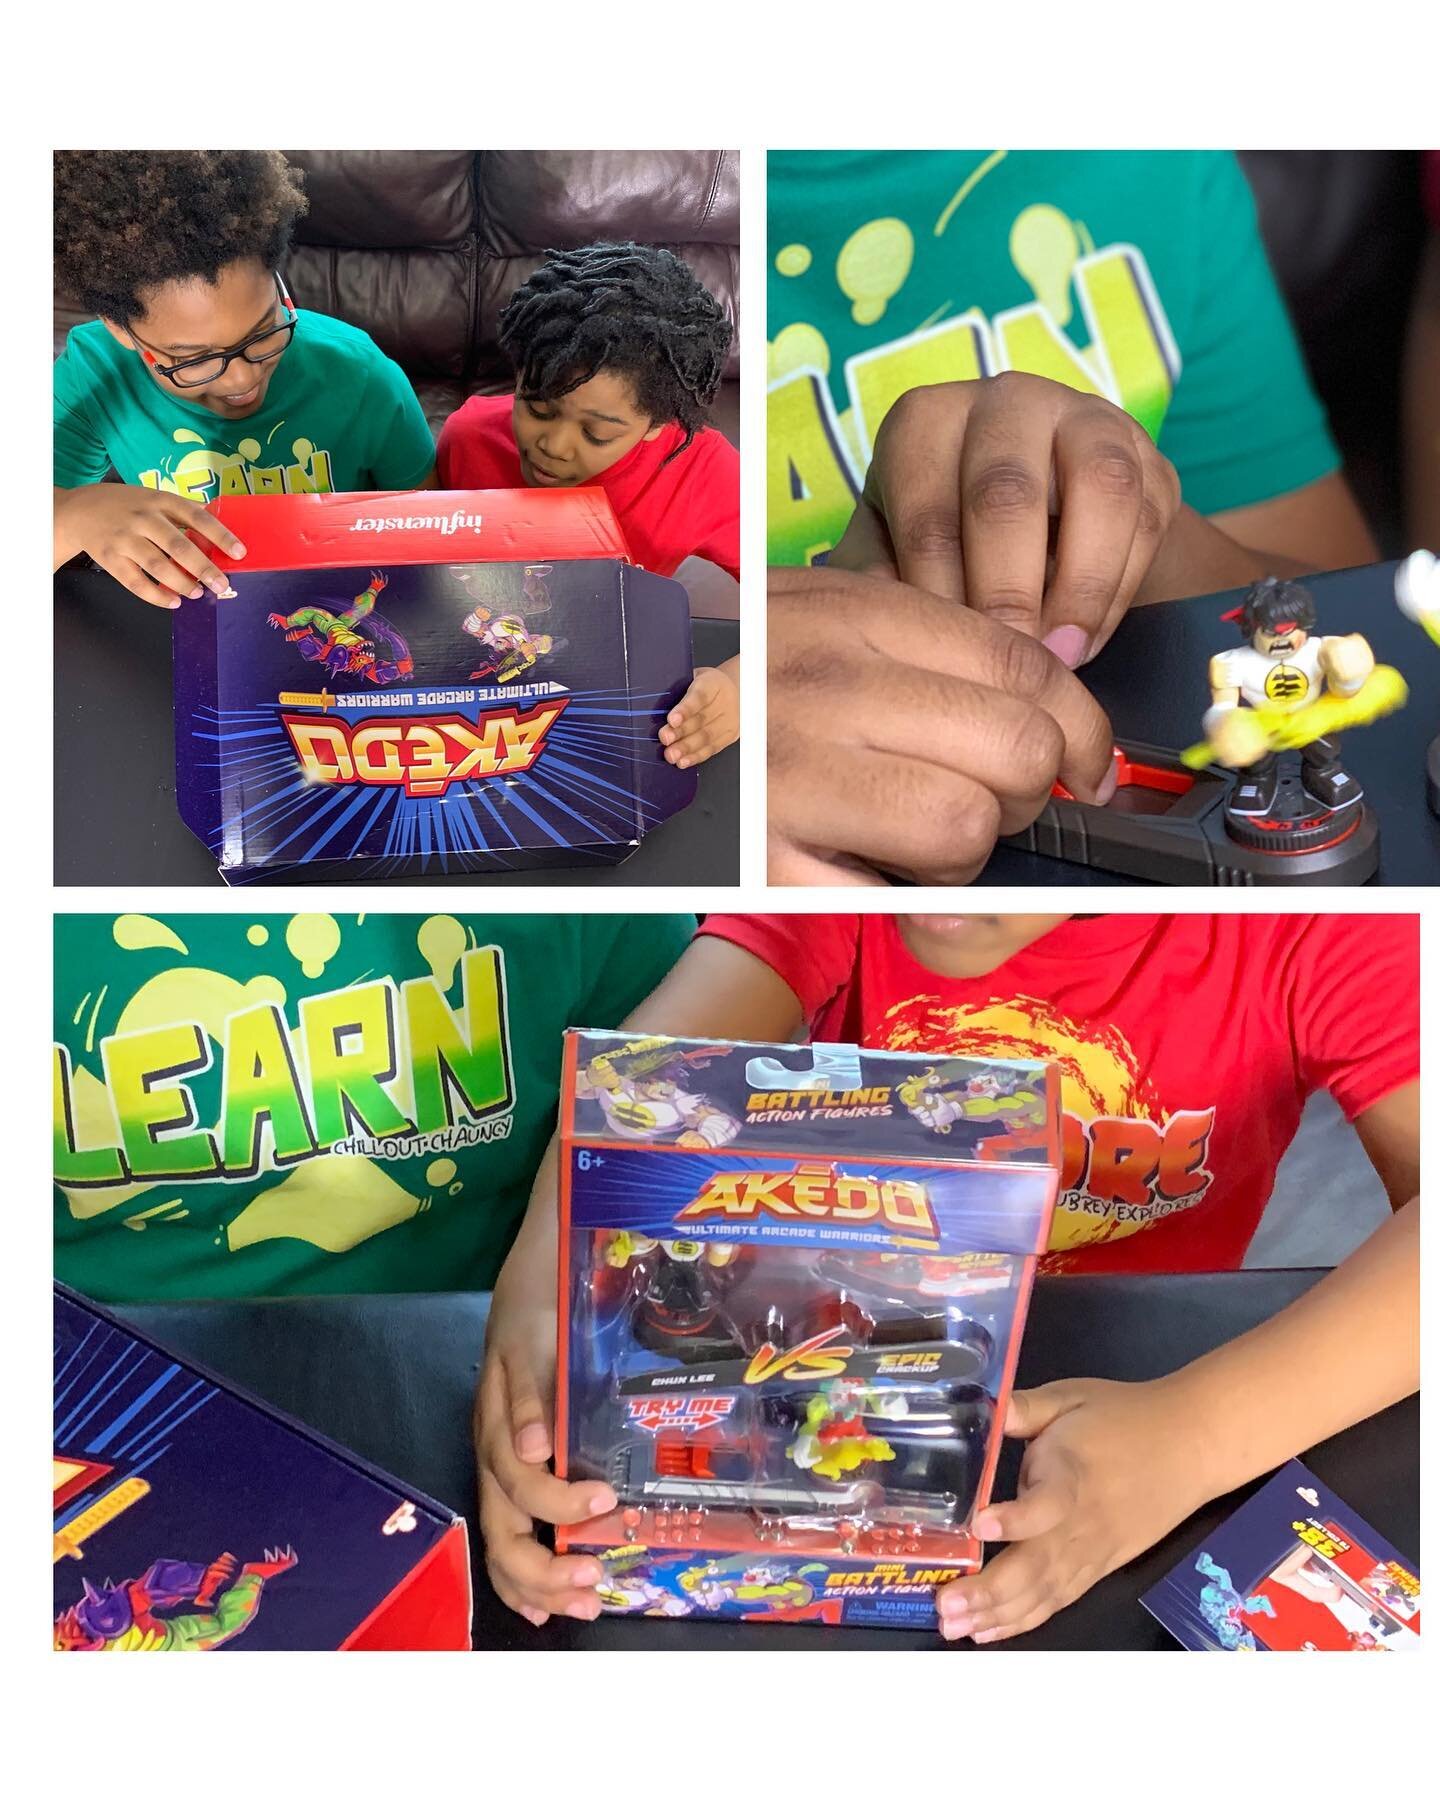 We received received this AKĒDO Starter pack complimentary from Influenster and Moose Toys. 

My boys had fun playing with this set. 

Here&rsquo;s what they had to say: 
&ldquo;So yesterday we got an AKĒDO Starter pack from Infuenster. 

AKĒDO is a 